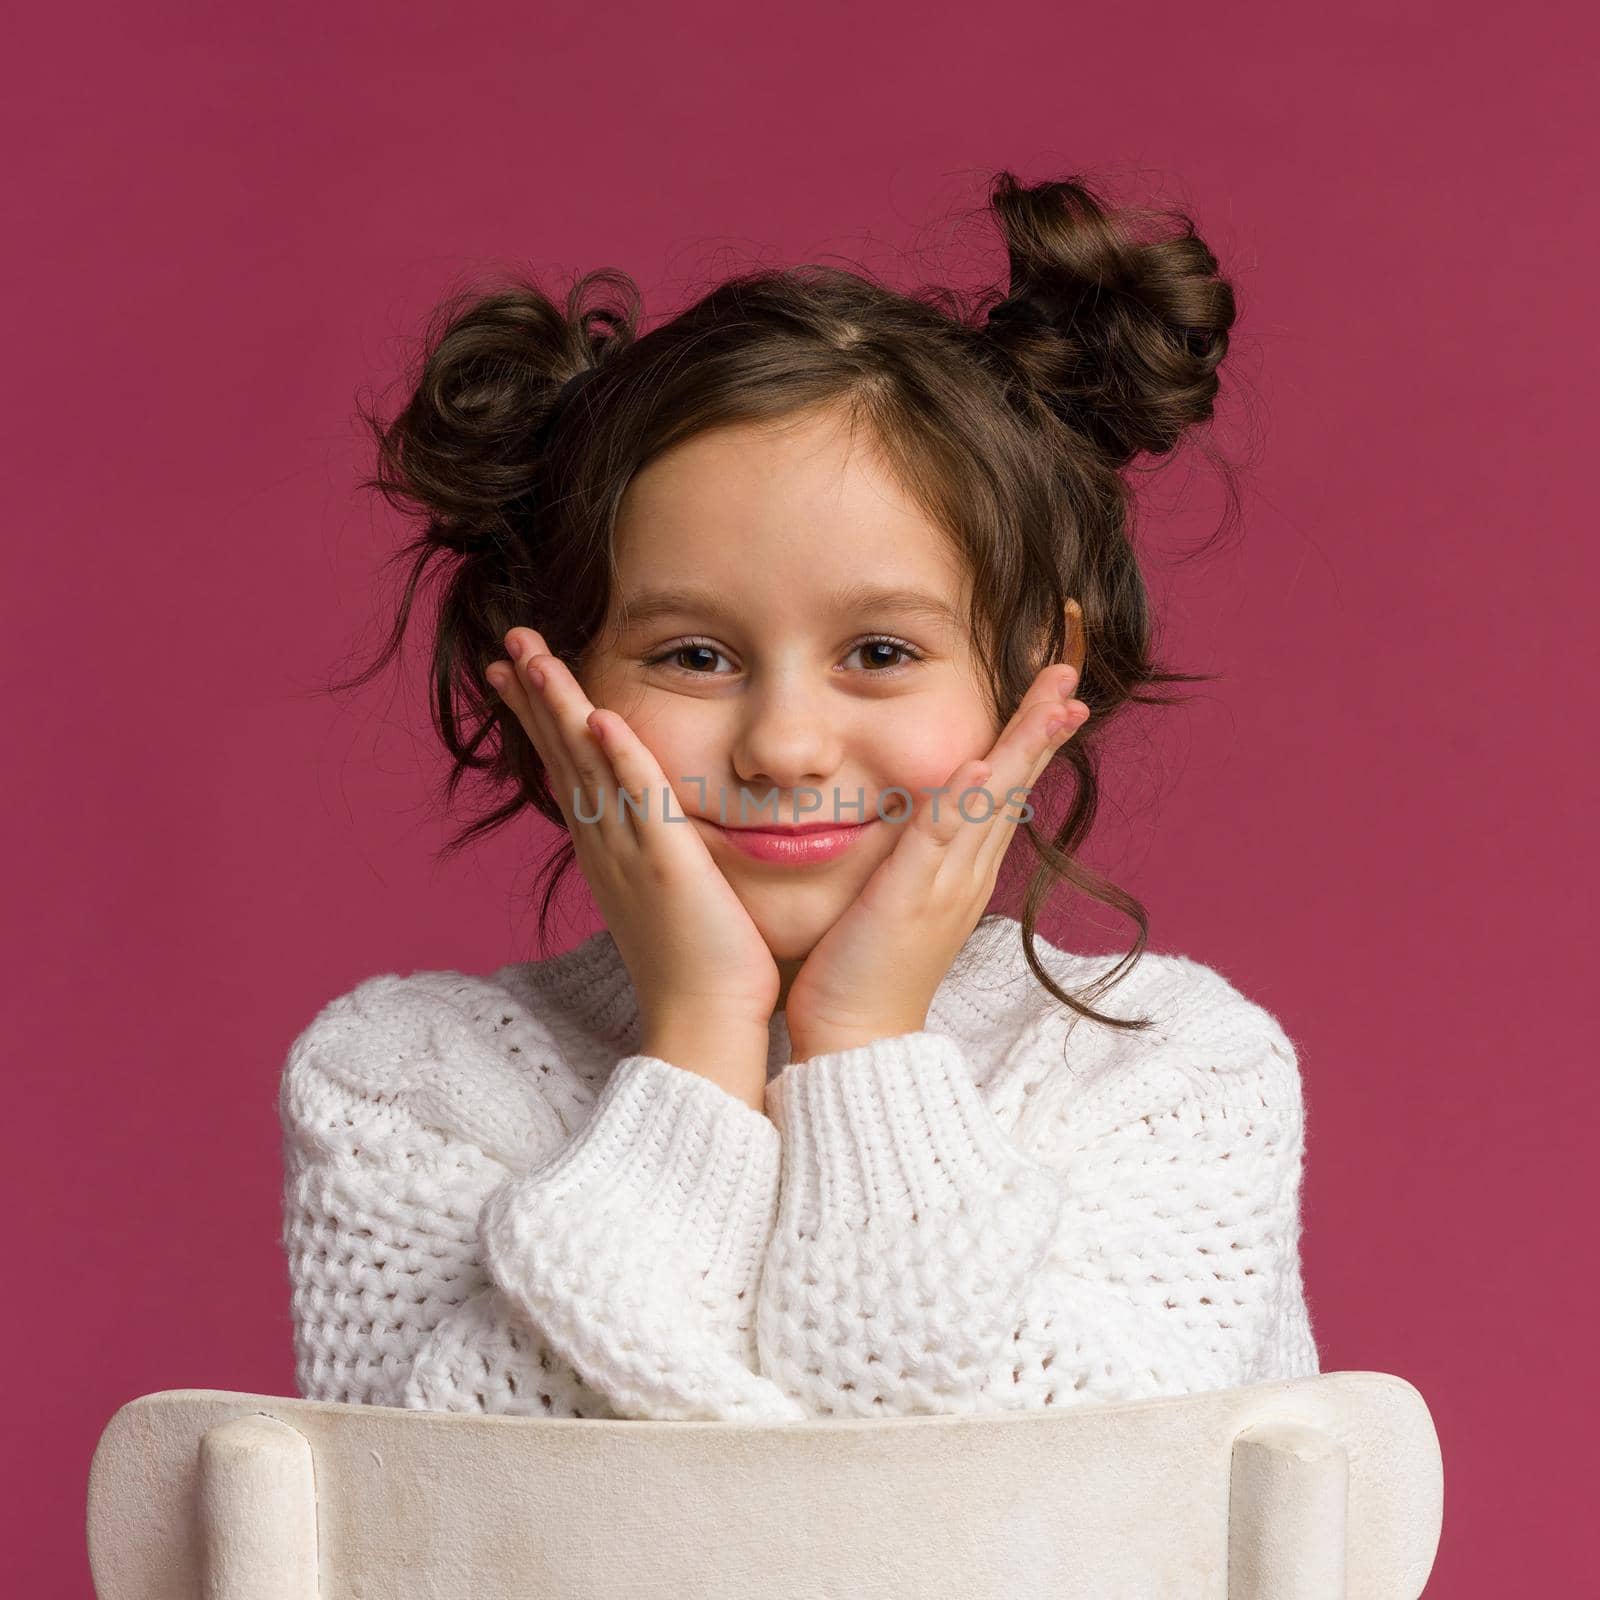 Photo of smiling little girl child isolated over pink background. by zartarn